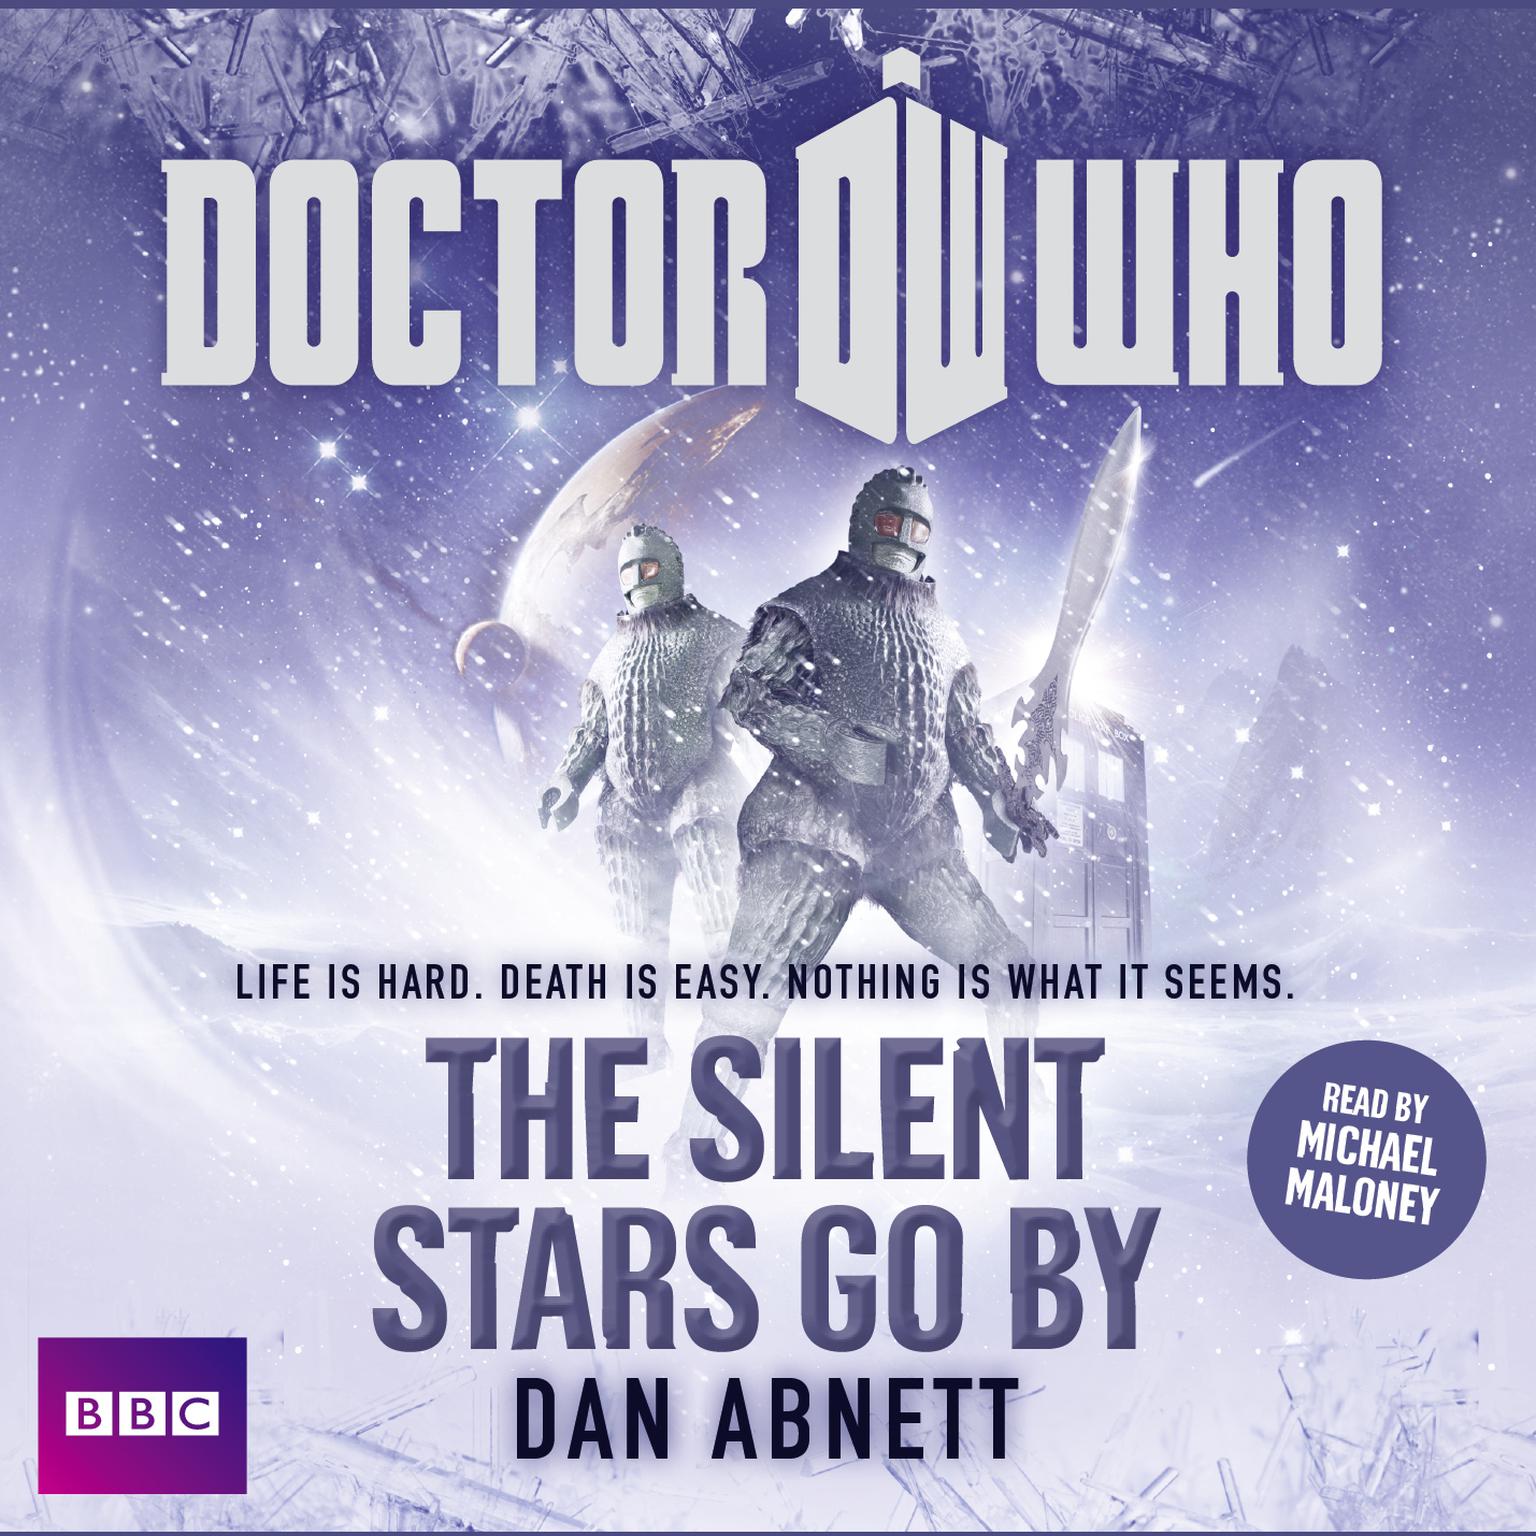 Doctor Who: The Silent Stars Go By Audiobook, by Dan Abnett